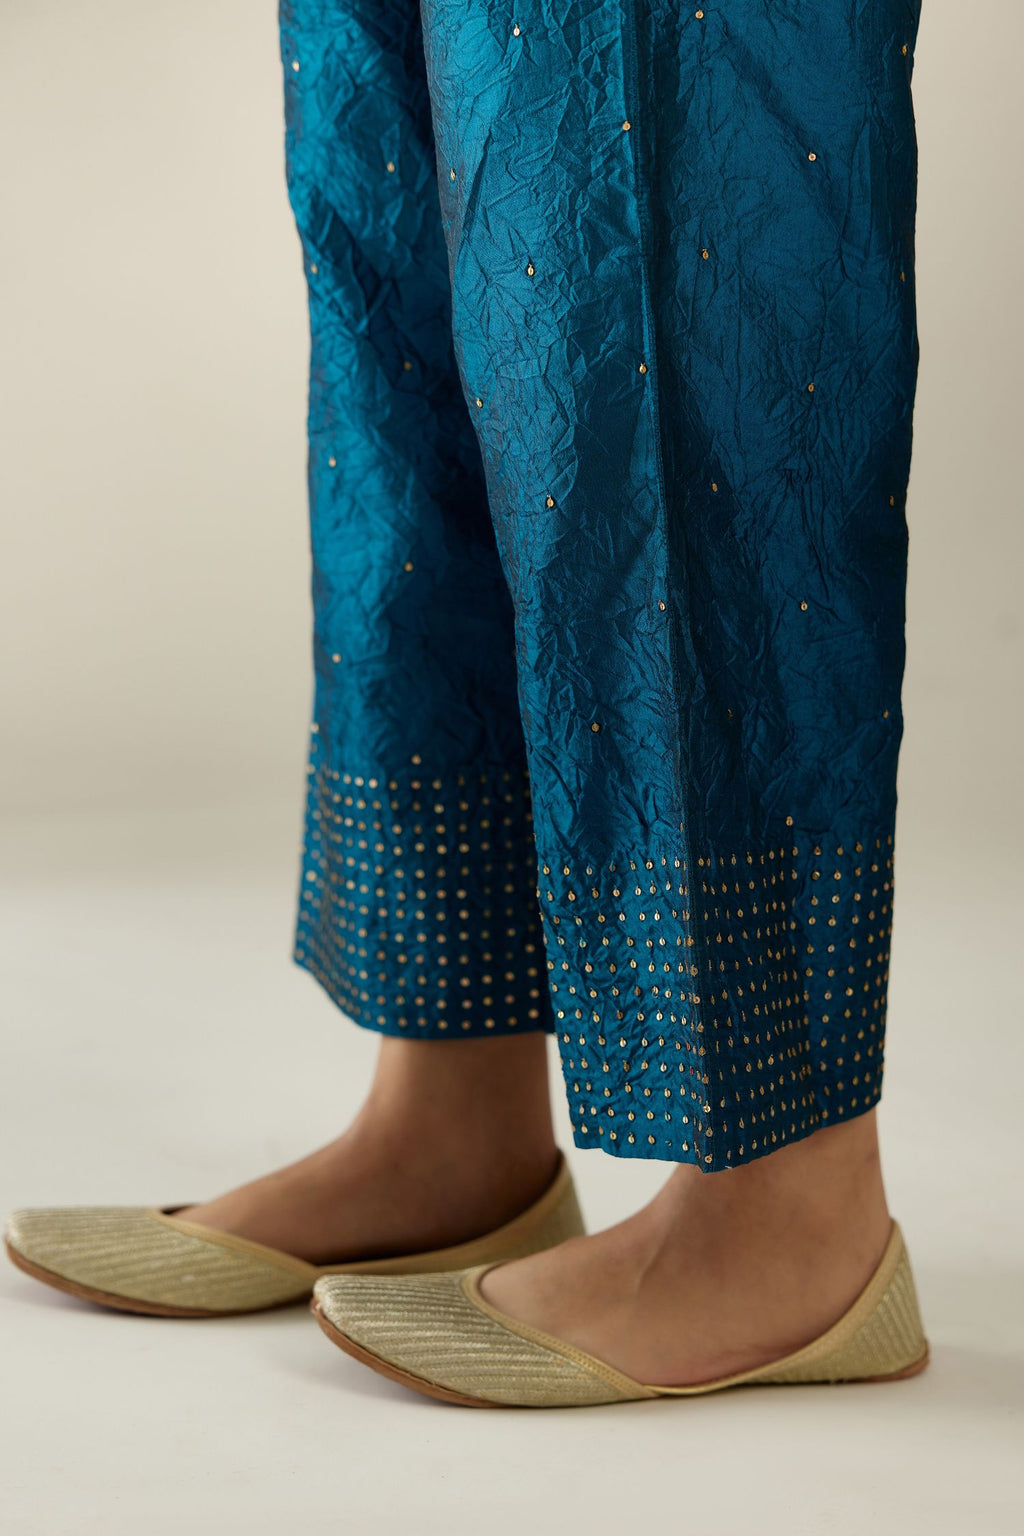 Dark teal hand crushed silk straight pants detailed with gold sequins at hem and a single sequin buti is sprayed all over the pants and side pockets